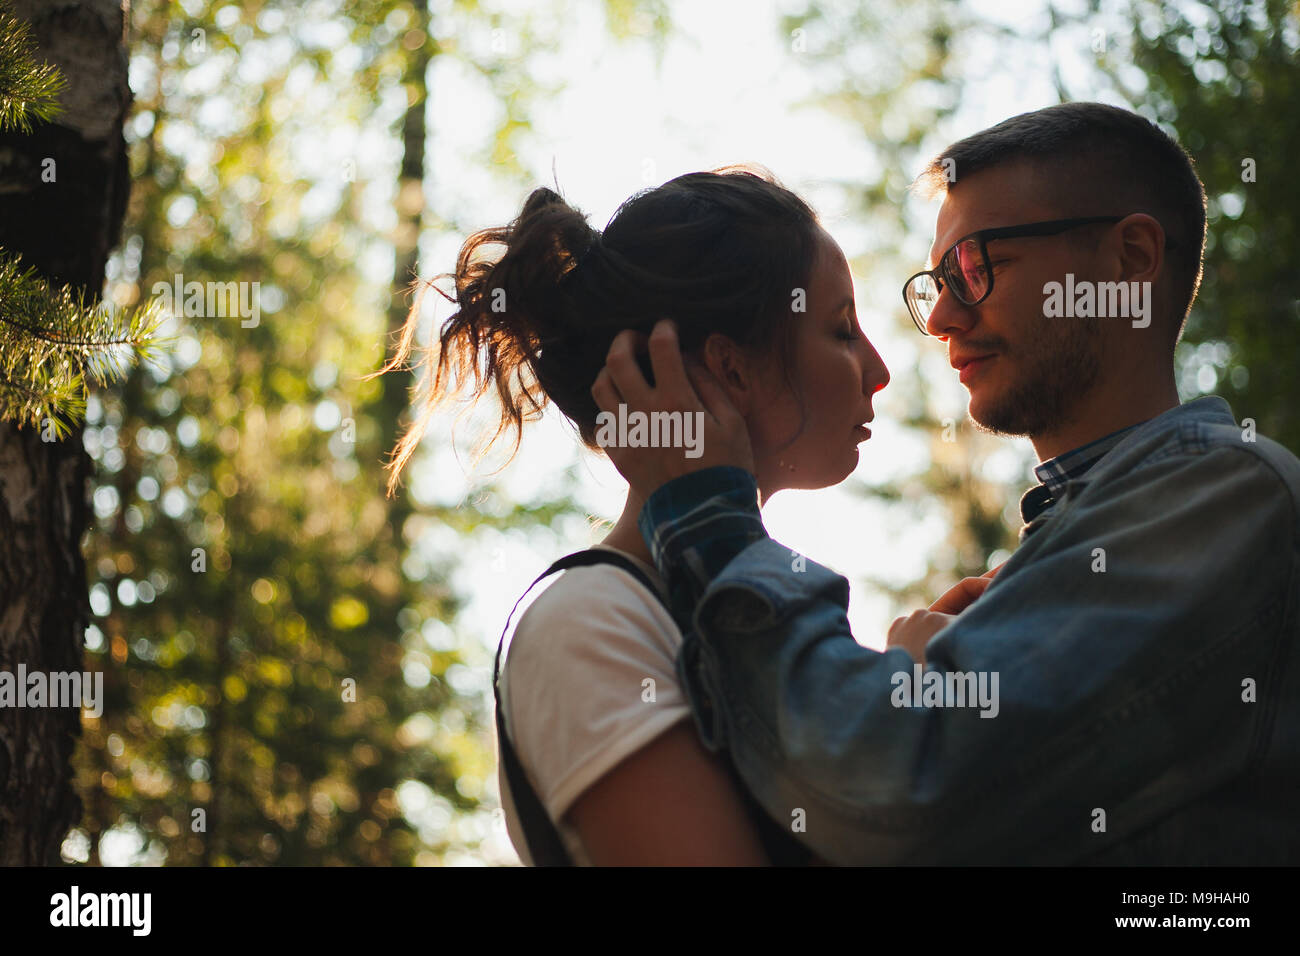 A beautiful young couple kiss in the forest Stock Photo